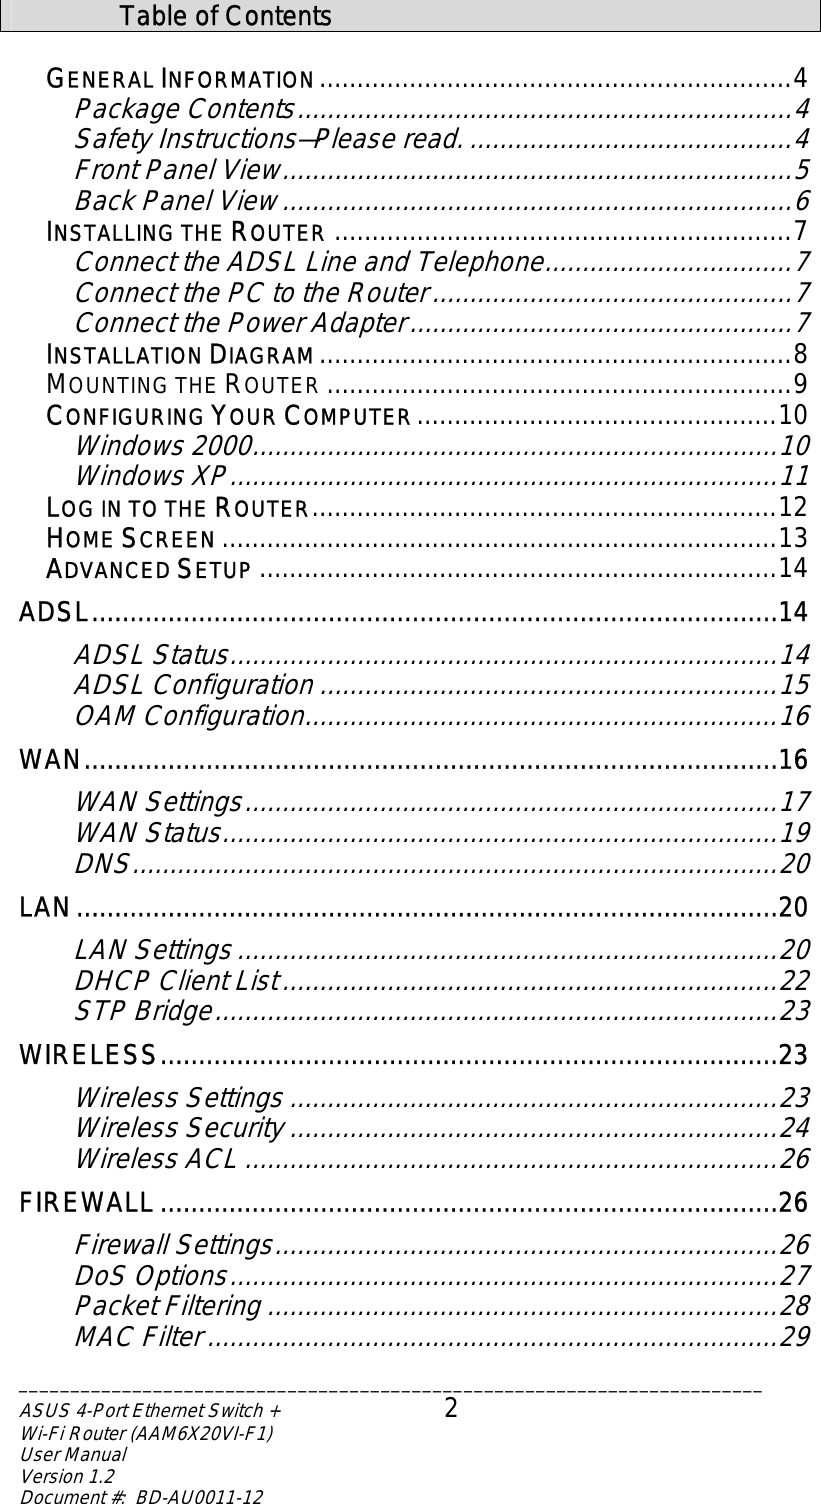 ________________________________________________________________________ASUS 4-Port Ethernet Switch +  2 Wi-Fi Router (AAM6X20VI-F1) User Manual                                                                         Version 1.2 Document #:  BD-AU0011-12   Table of Contents  GENERAL INFORMATION...............................................................4 Package Contents..................................................................4 Safety Ins ruc ions—Please read.t tr...........................................4 F ont Panel View....................................................................5 Back Panel View ....................................................................6 INSTALLING THE ROUTER .............................................................7 Connect the ADSL Line and Telephone.................................7 Connect the PC to the Router................................................7 Connect the Power Adapter...................................................7 INSTALLATION DIAGRAM...............................................................8 MOUNTING THE ROUTER ..............................................................9 CONFIGURING YOUR COMPUTER................................................10 Windows 2000......................................................................10 Windows XP.........................................................................11 LOG IN TO THE ROUTER..............................................................12 HOME SCREEN ..........................................................................13 ADVANCED SETUP .....................................................................14 ADSL..........................................................................................14 ADSL Status.........................................................................14 ADSL Configuration .............................................................15 OAM Configuration...............................................................16 WAN...........................................................................................16 WAN Settings.......................................................................17 WAN Status..........................................................................19 DNS......................................................................................20 LAN............................................................................................20 LAN Settings ........................................................................20 DHCP Client List..................................................................22 STP Bridge...........................................................................23 WIRELESS.................................................................................23 Wireless Settings .................................................................23 Wireless Security .................................................................24 Wireless ACL .......................................................................26 FIREWALL .................................................................................26 Firewall Settings...................................................................26 DoS Options.........................................................................27 Packet Filtering ....................................................................28 MAC Filter ............................................................................29 